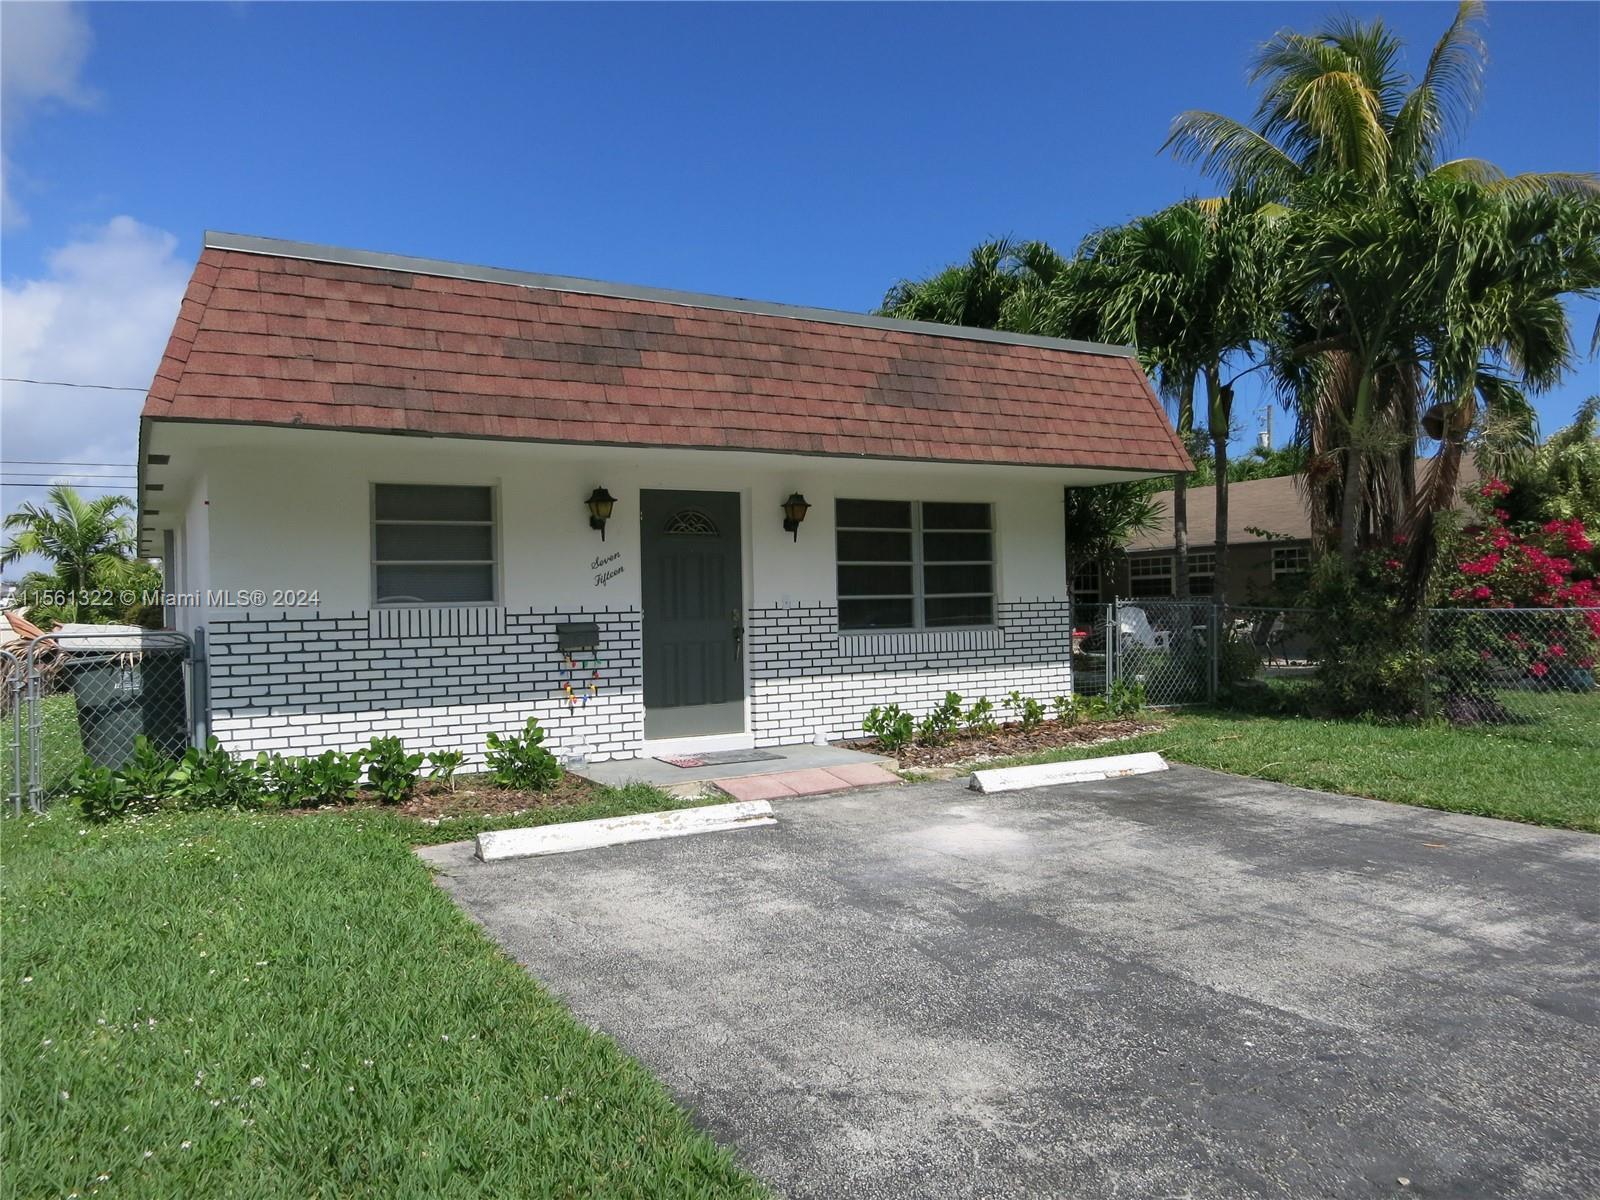 NO HOA! BEAUTIFUL 1 STORY, 2/2 HOUSE IN HALLANDALE BEACH is mostly renovated about 1 year ago.  Cent